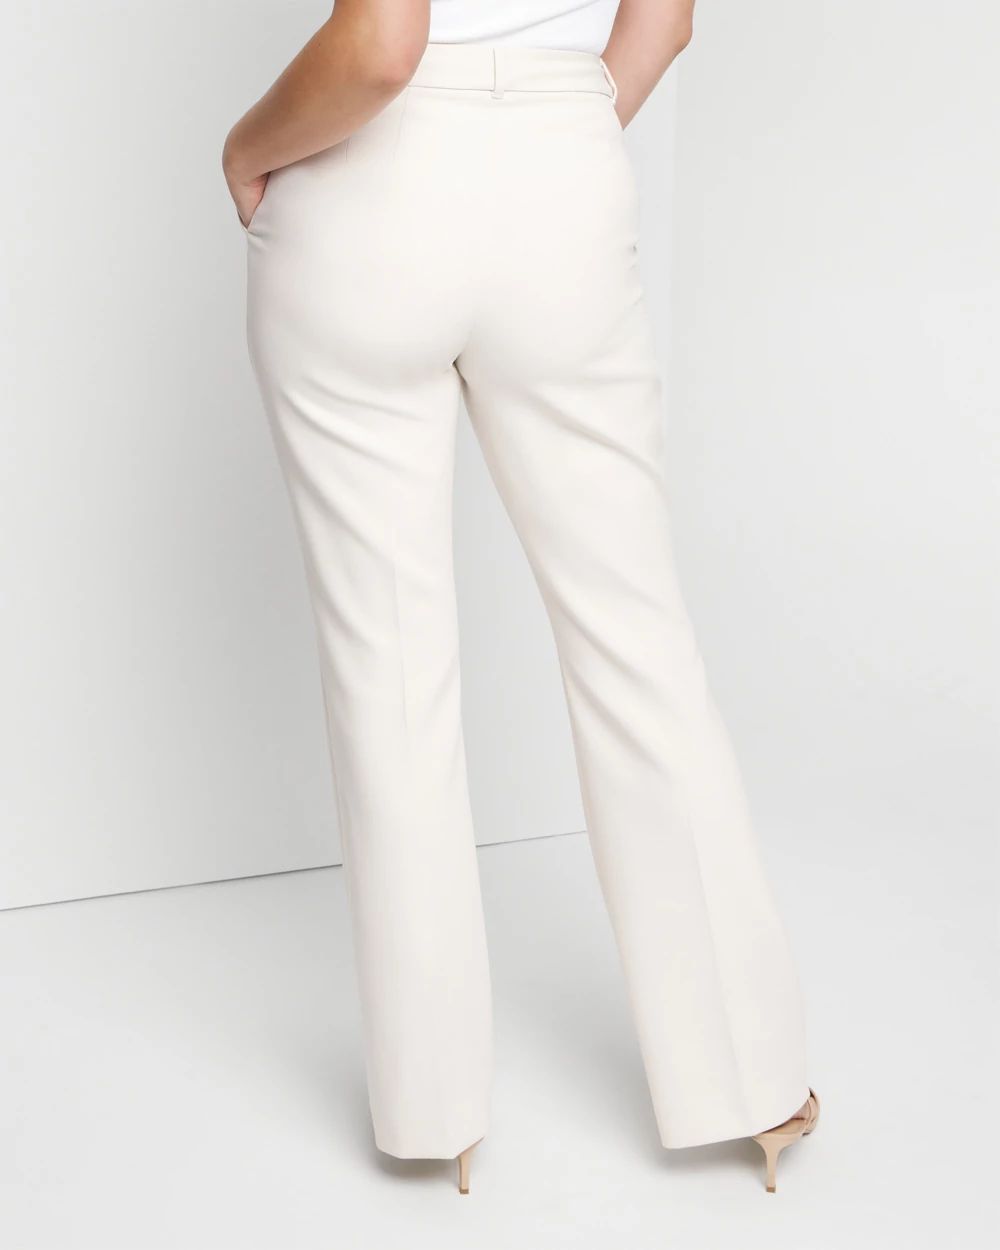 Luxe Slim Bootcut Pants click to view larger image.